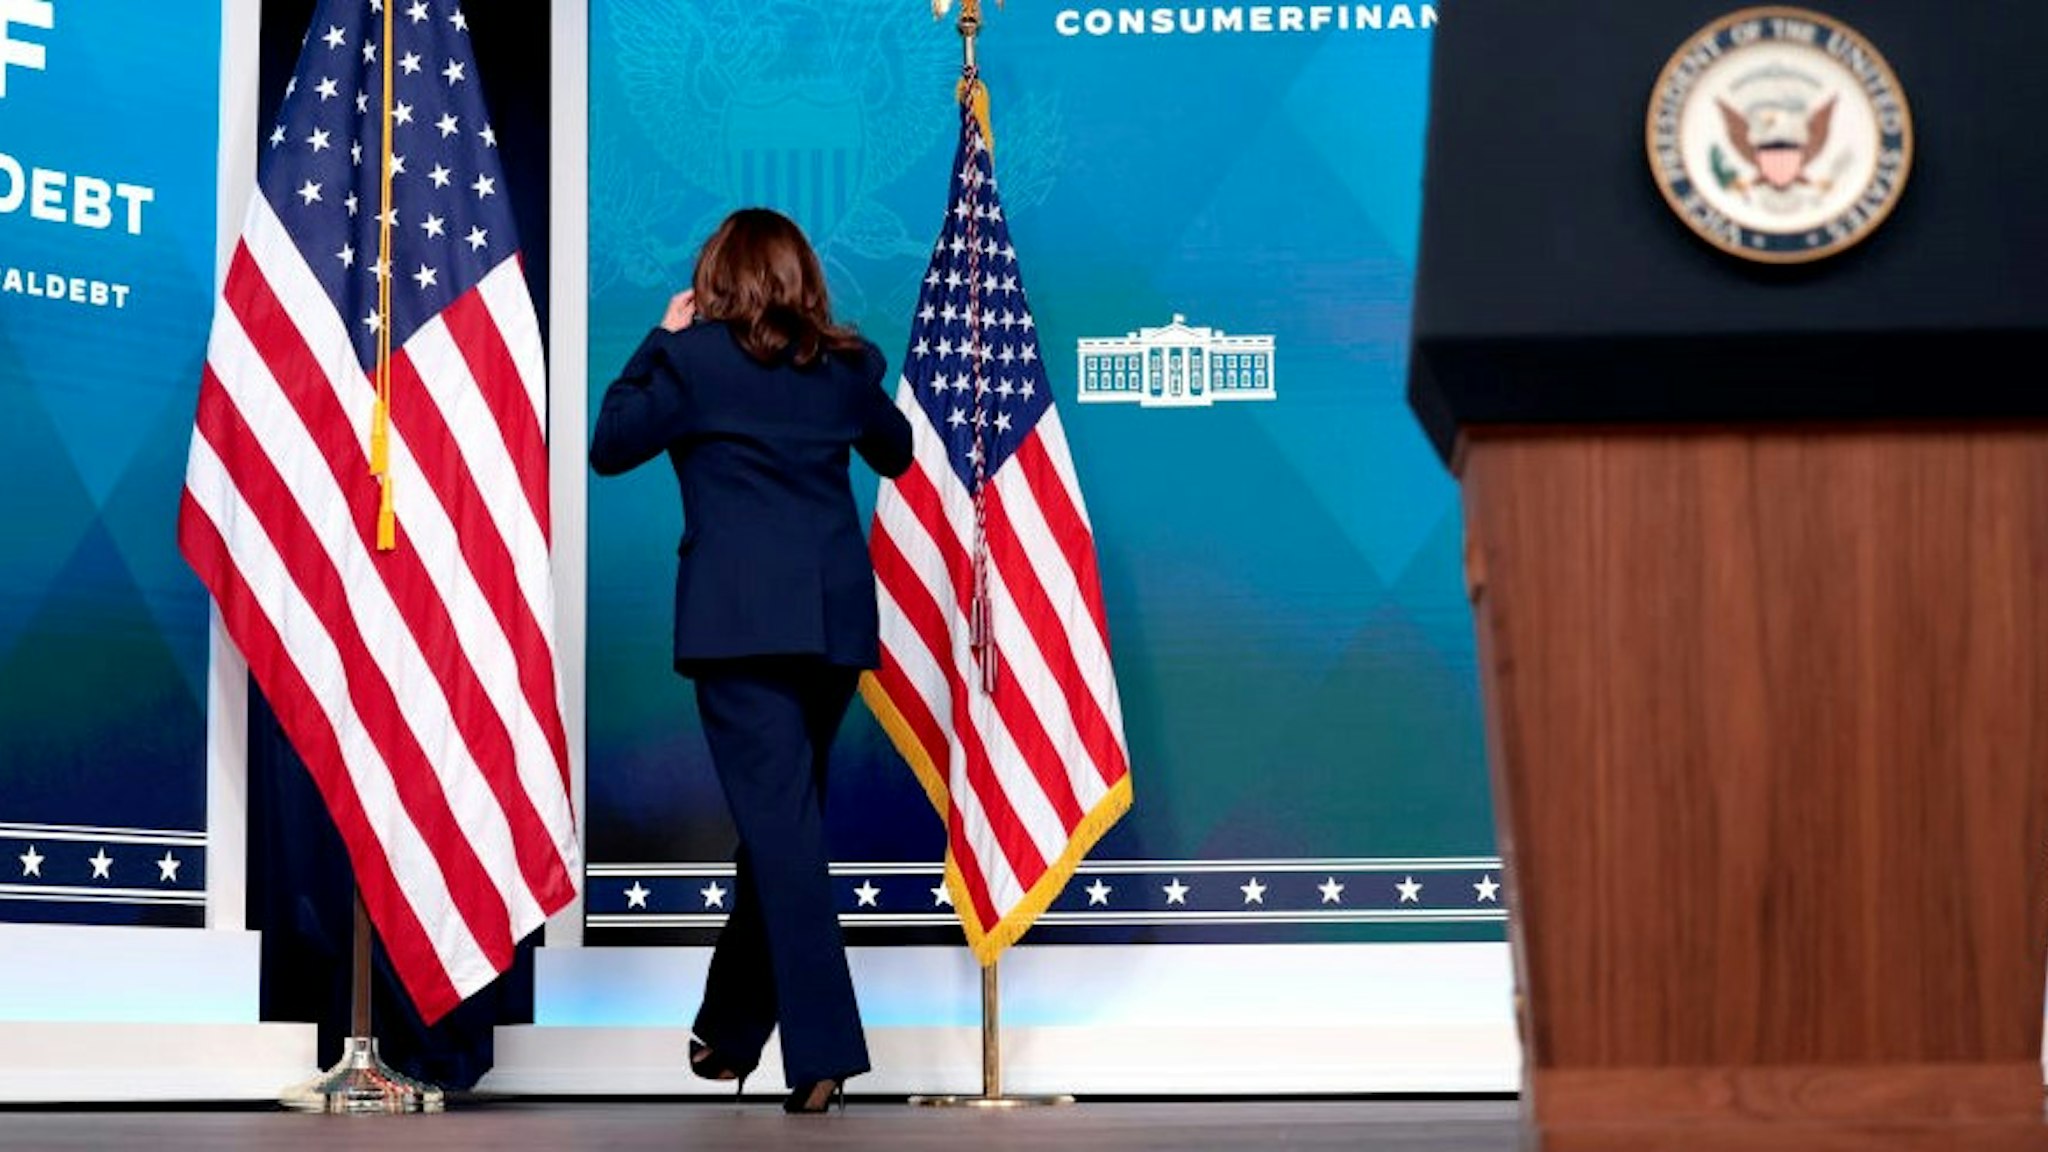 WASHINGTON, DC - APRIL 11: U.S. Vice President Kamala Harris walks offstage after delivering remarks on medical debt in the South Court Auditorium of the White House on April 11, 2022 in Washington, DC. During the remarks Vice President Harris, along with other administrative officials, announced new actions the Biden administration was taking to help people in the United States struggling with medical debt. (Photo by